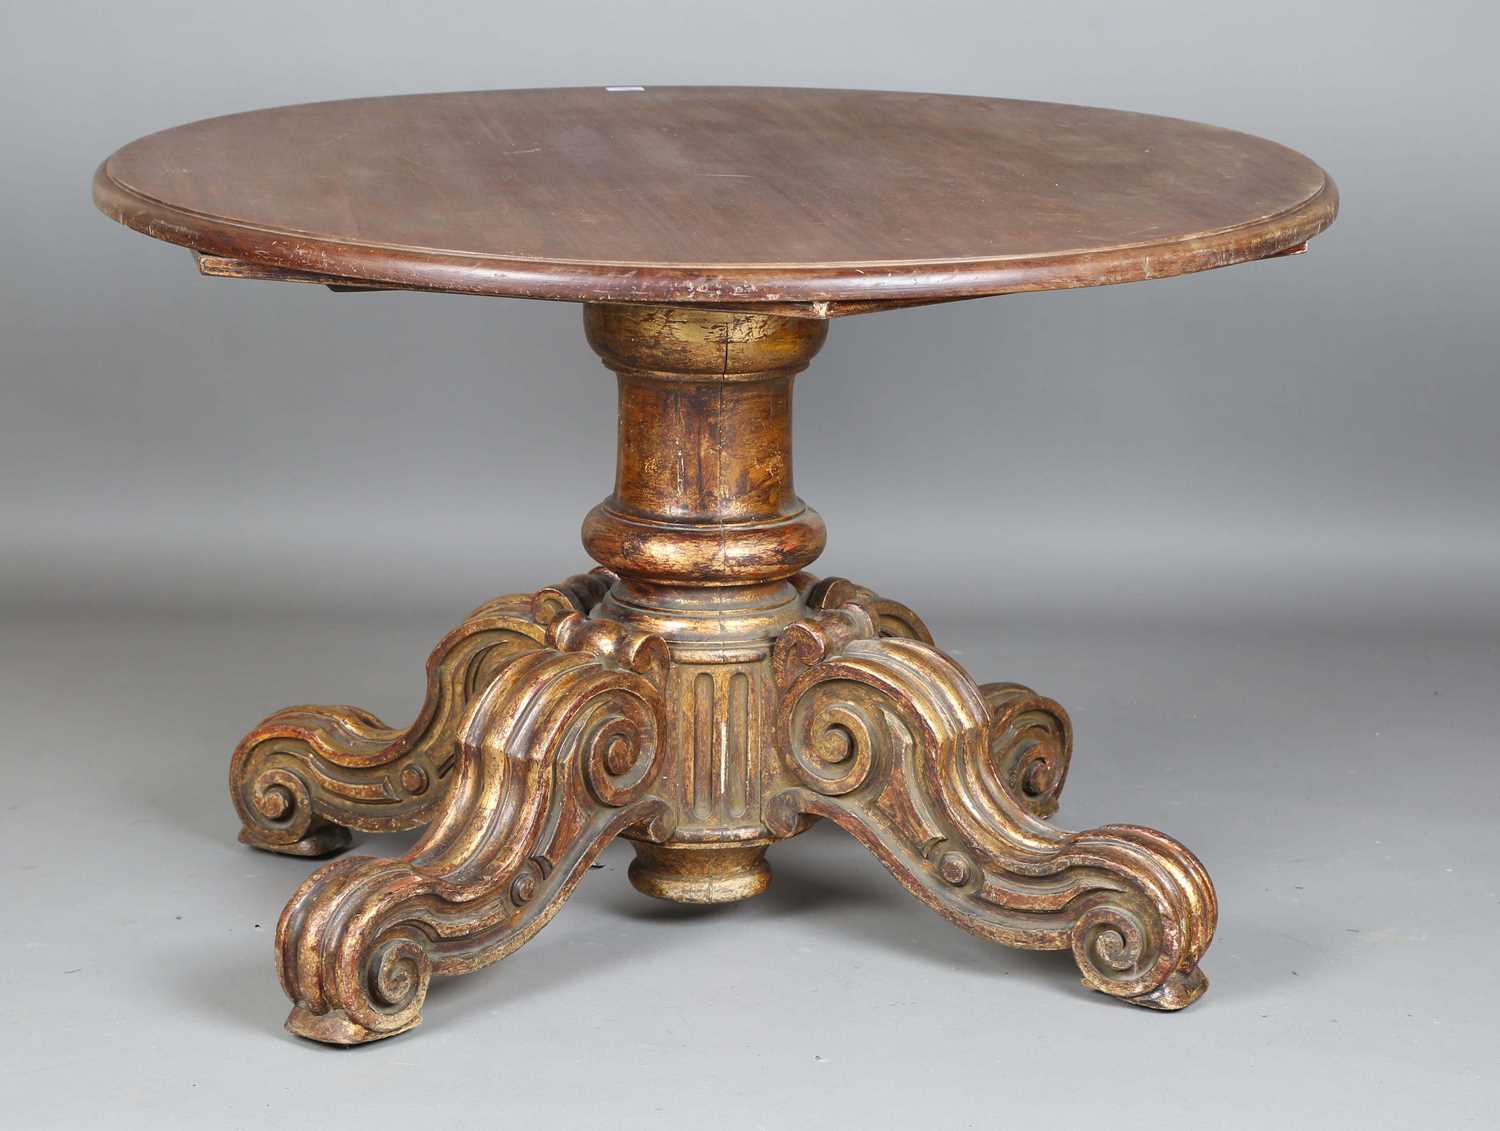 A 19th century giltwood table base with a later removable top, the base carved with scrolling legs